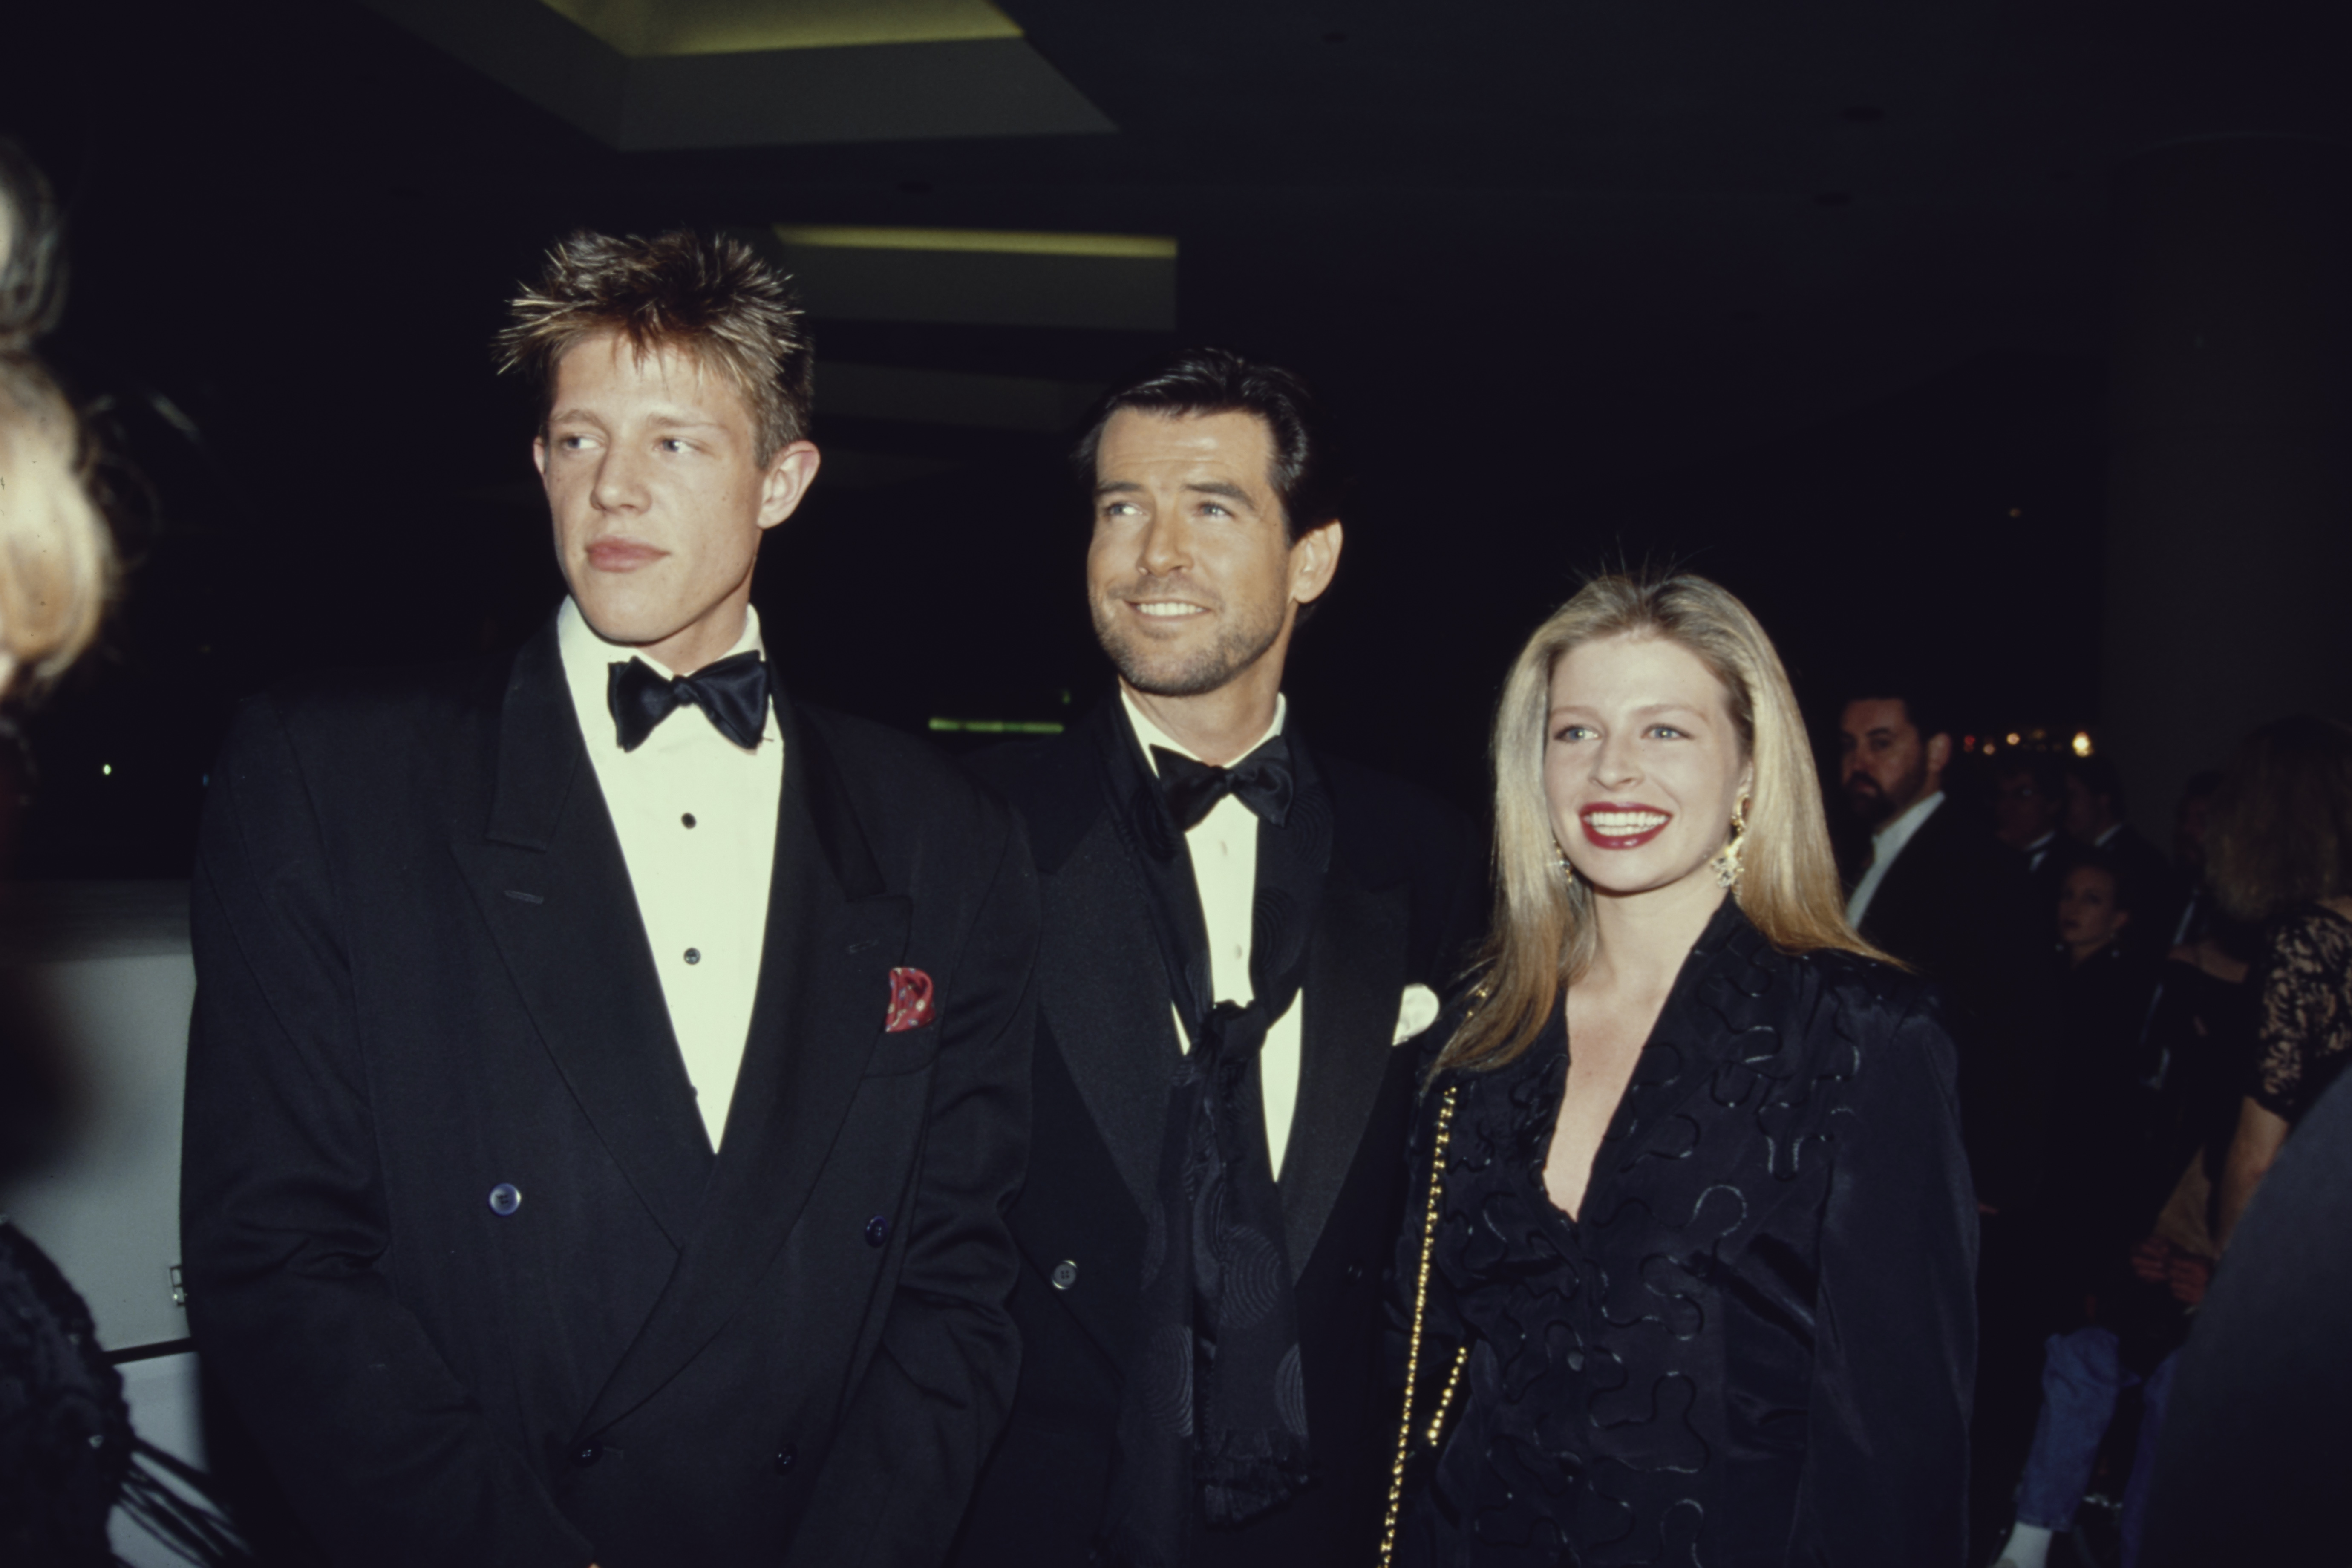 Pierce Brosnan with his children Christopher and Charlotte Harris at the Golden Globes in 1992 in California | Source: Getty Images